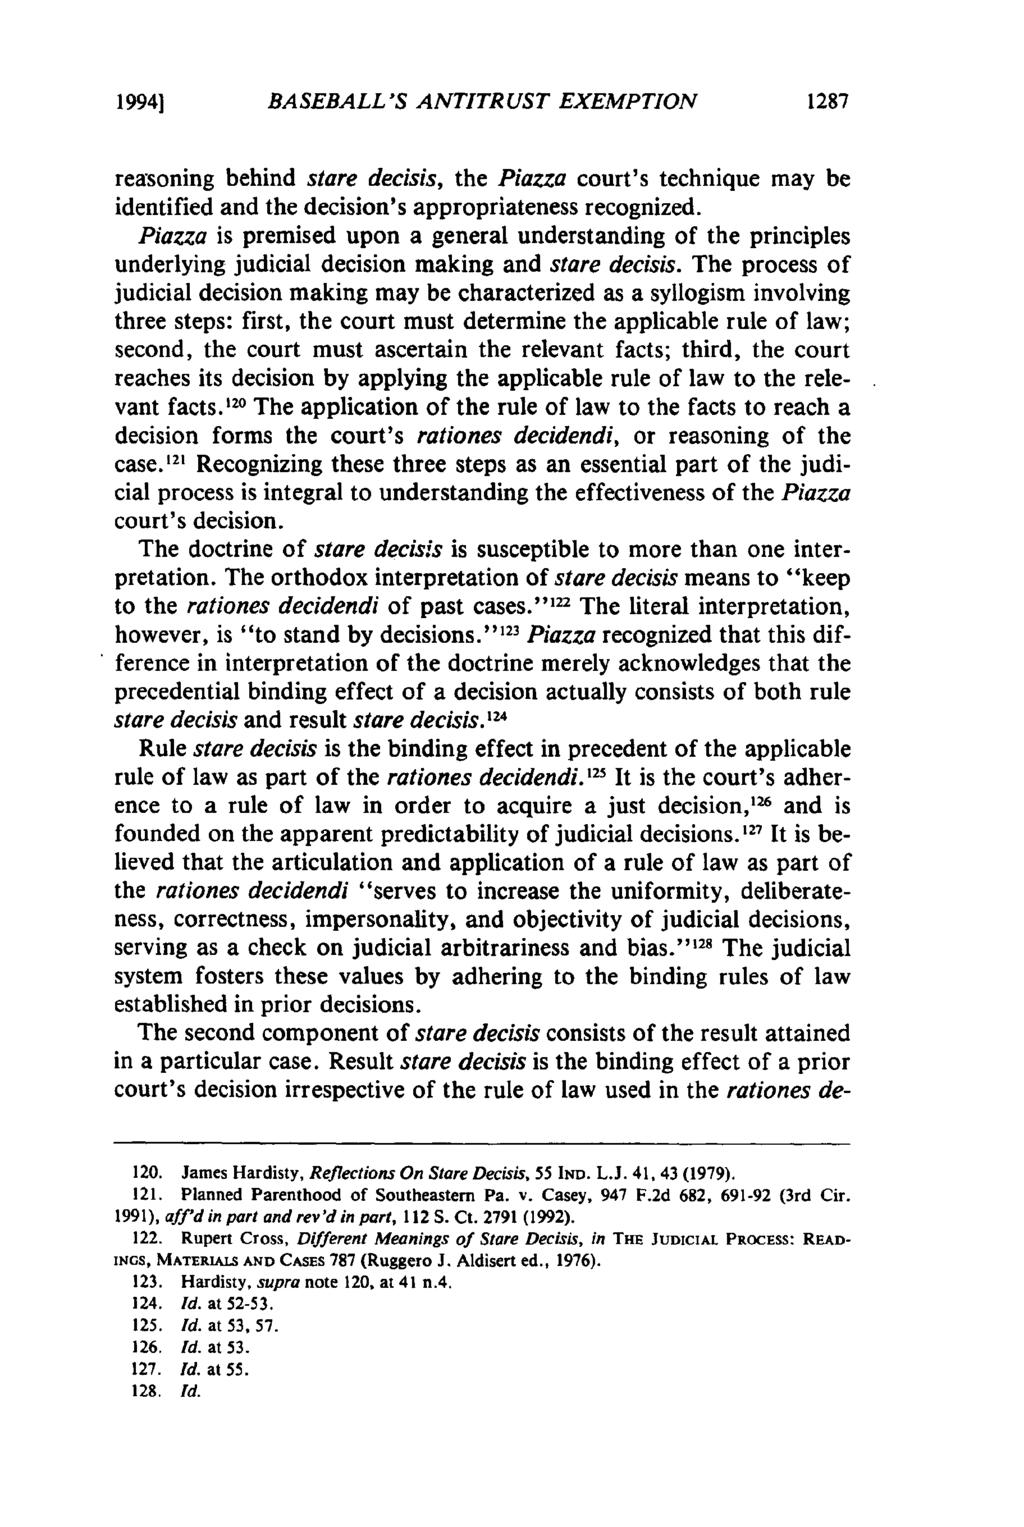 19941 BASEBALL'S ANTITRUST EXEMPTION reasoning behind stare decisis, the Piazza court's technique may be identified and the decision's appropriateness recognized.